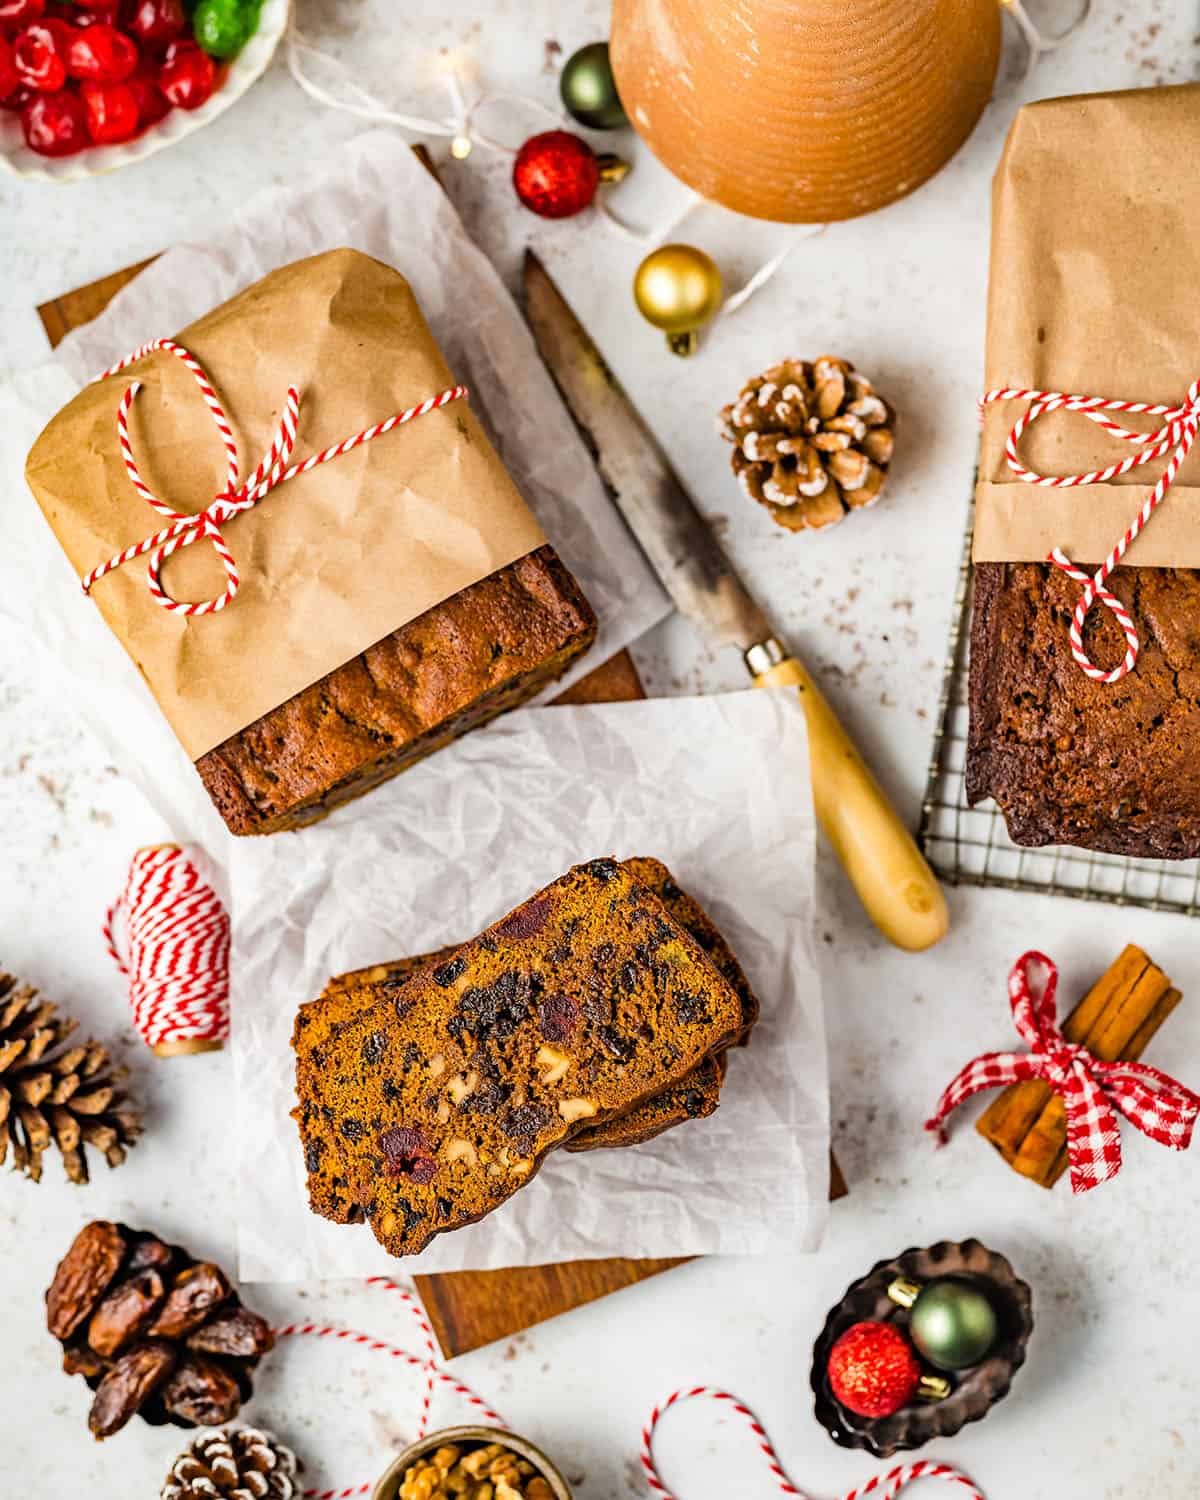 A loaf of fruit cake with half in slices, while the other half is wrapped in parchment paper tied with red and white twine. Surrounded by a loaf of fruit cake still in the pan, pine cones, and small ornaments. 